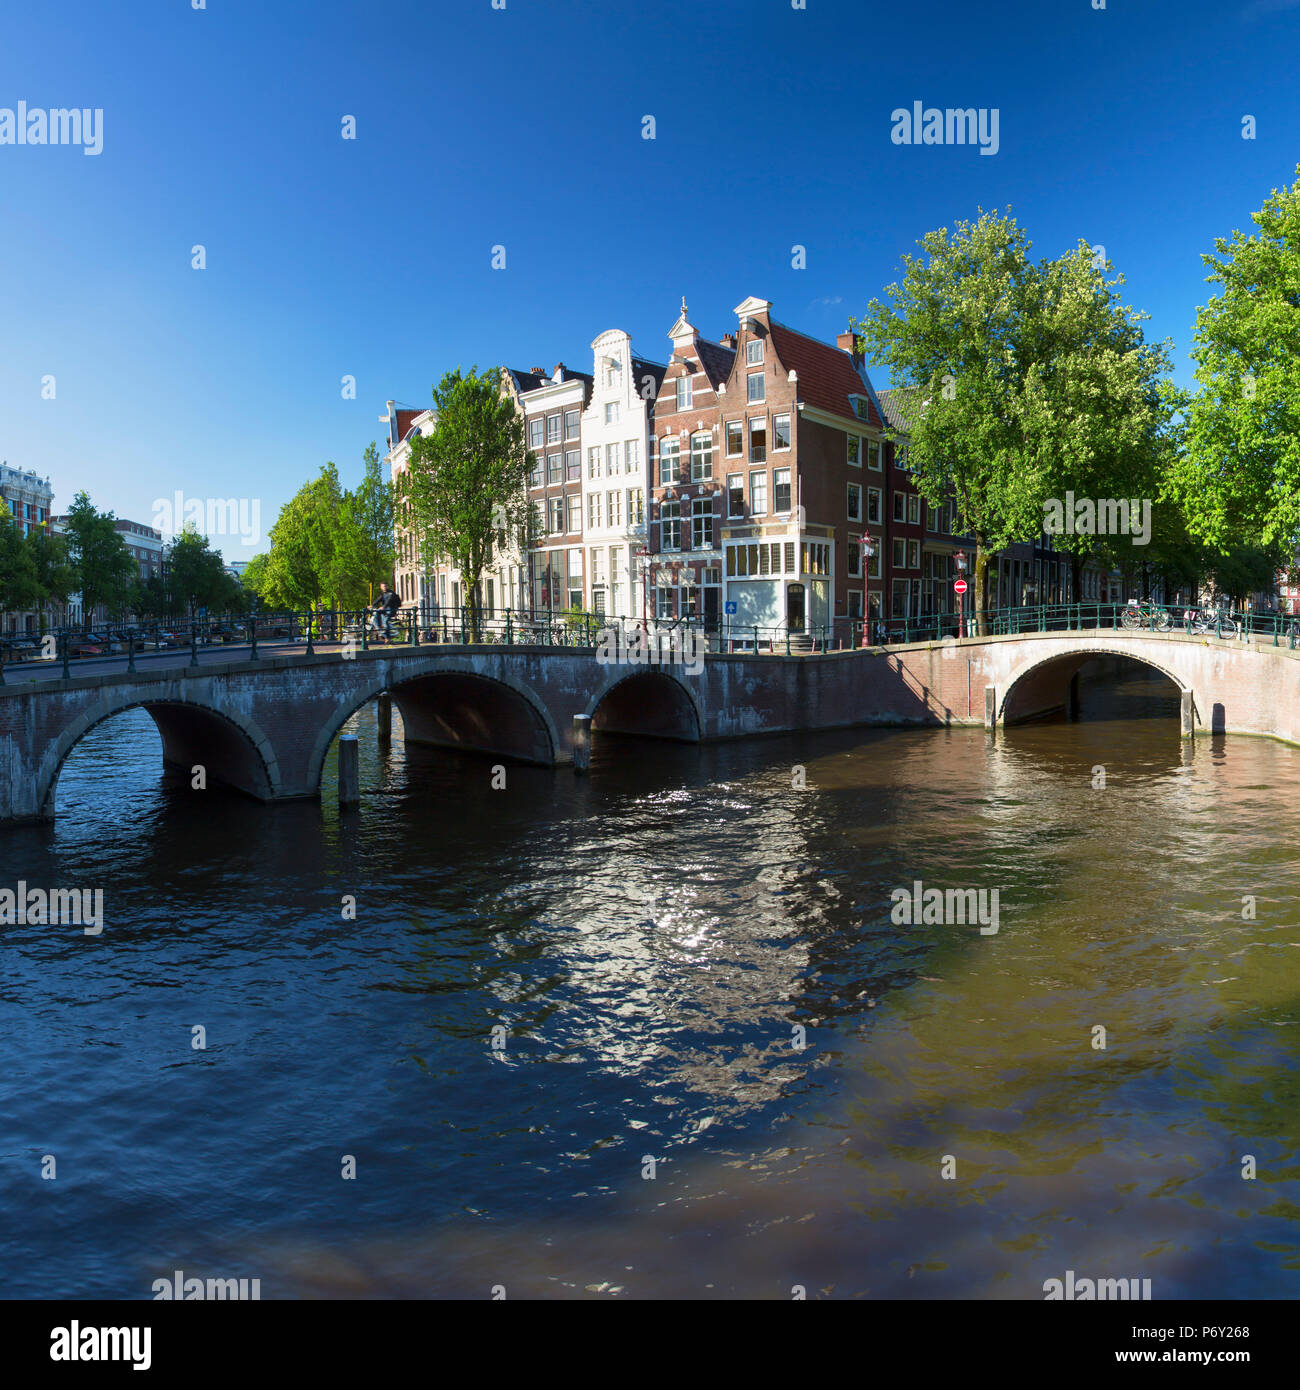 Canal Prinsengracht, Amsterdam, Pays-Bas Banque D'Images